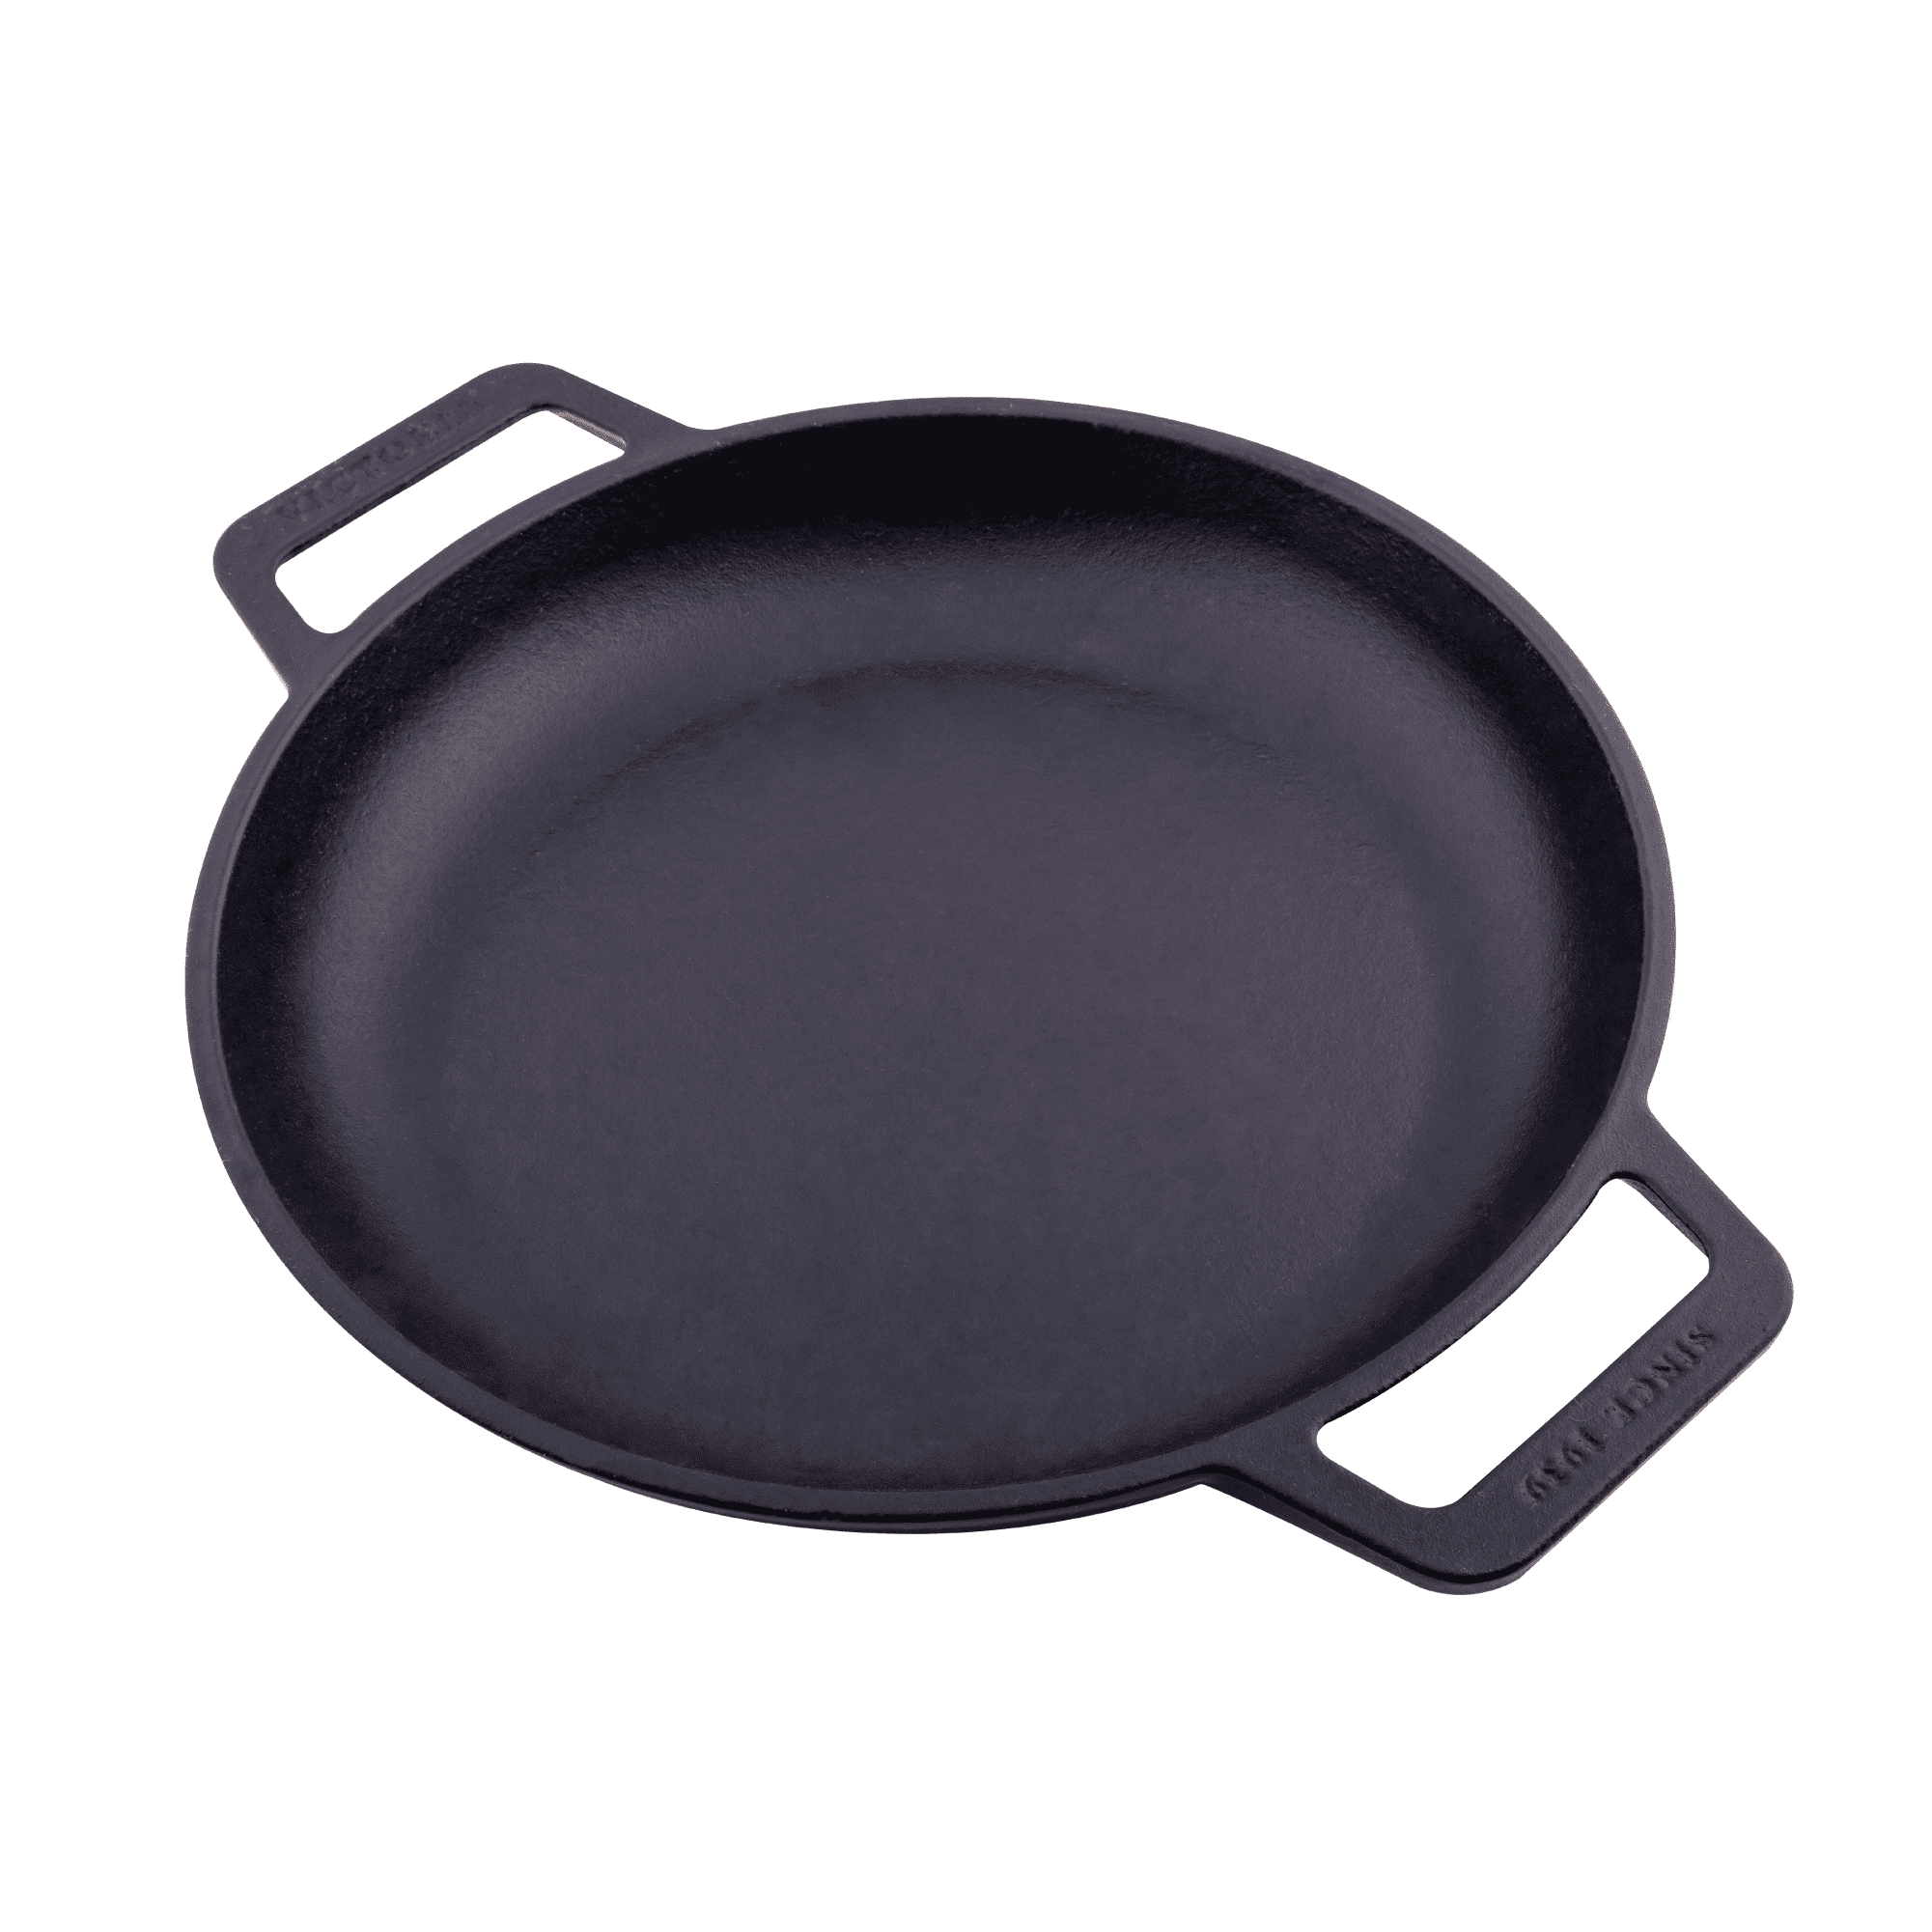  Victoria Cast Iron Wok with Loop Handles, Made in Colombia, 14  Inches: Home & Kitchen